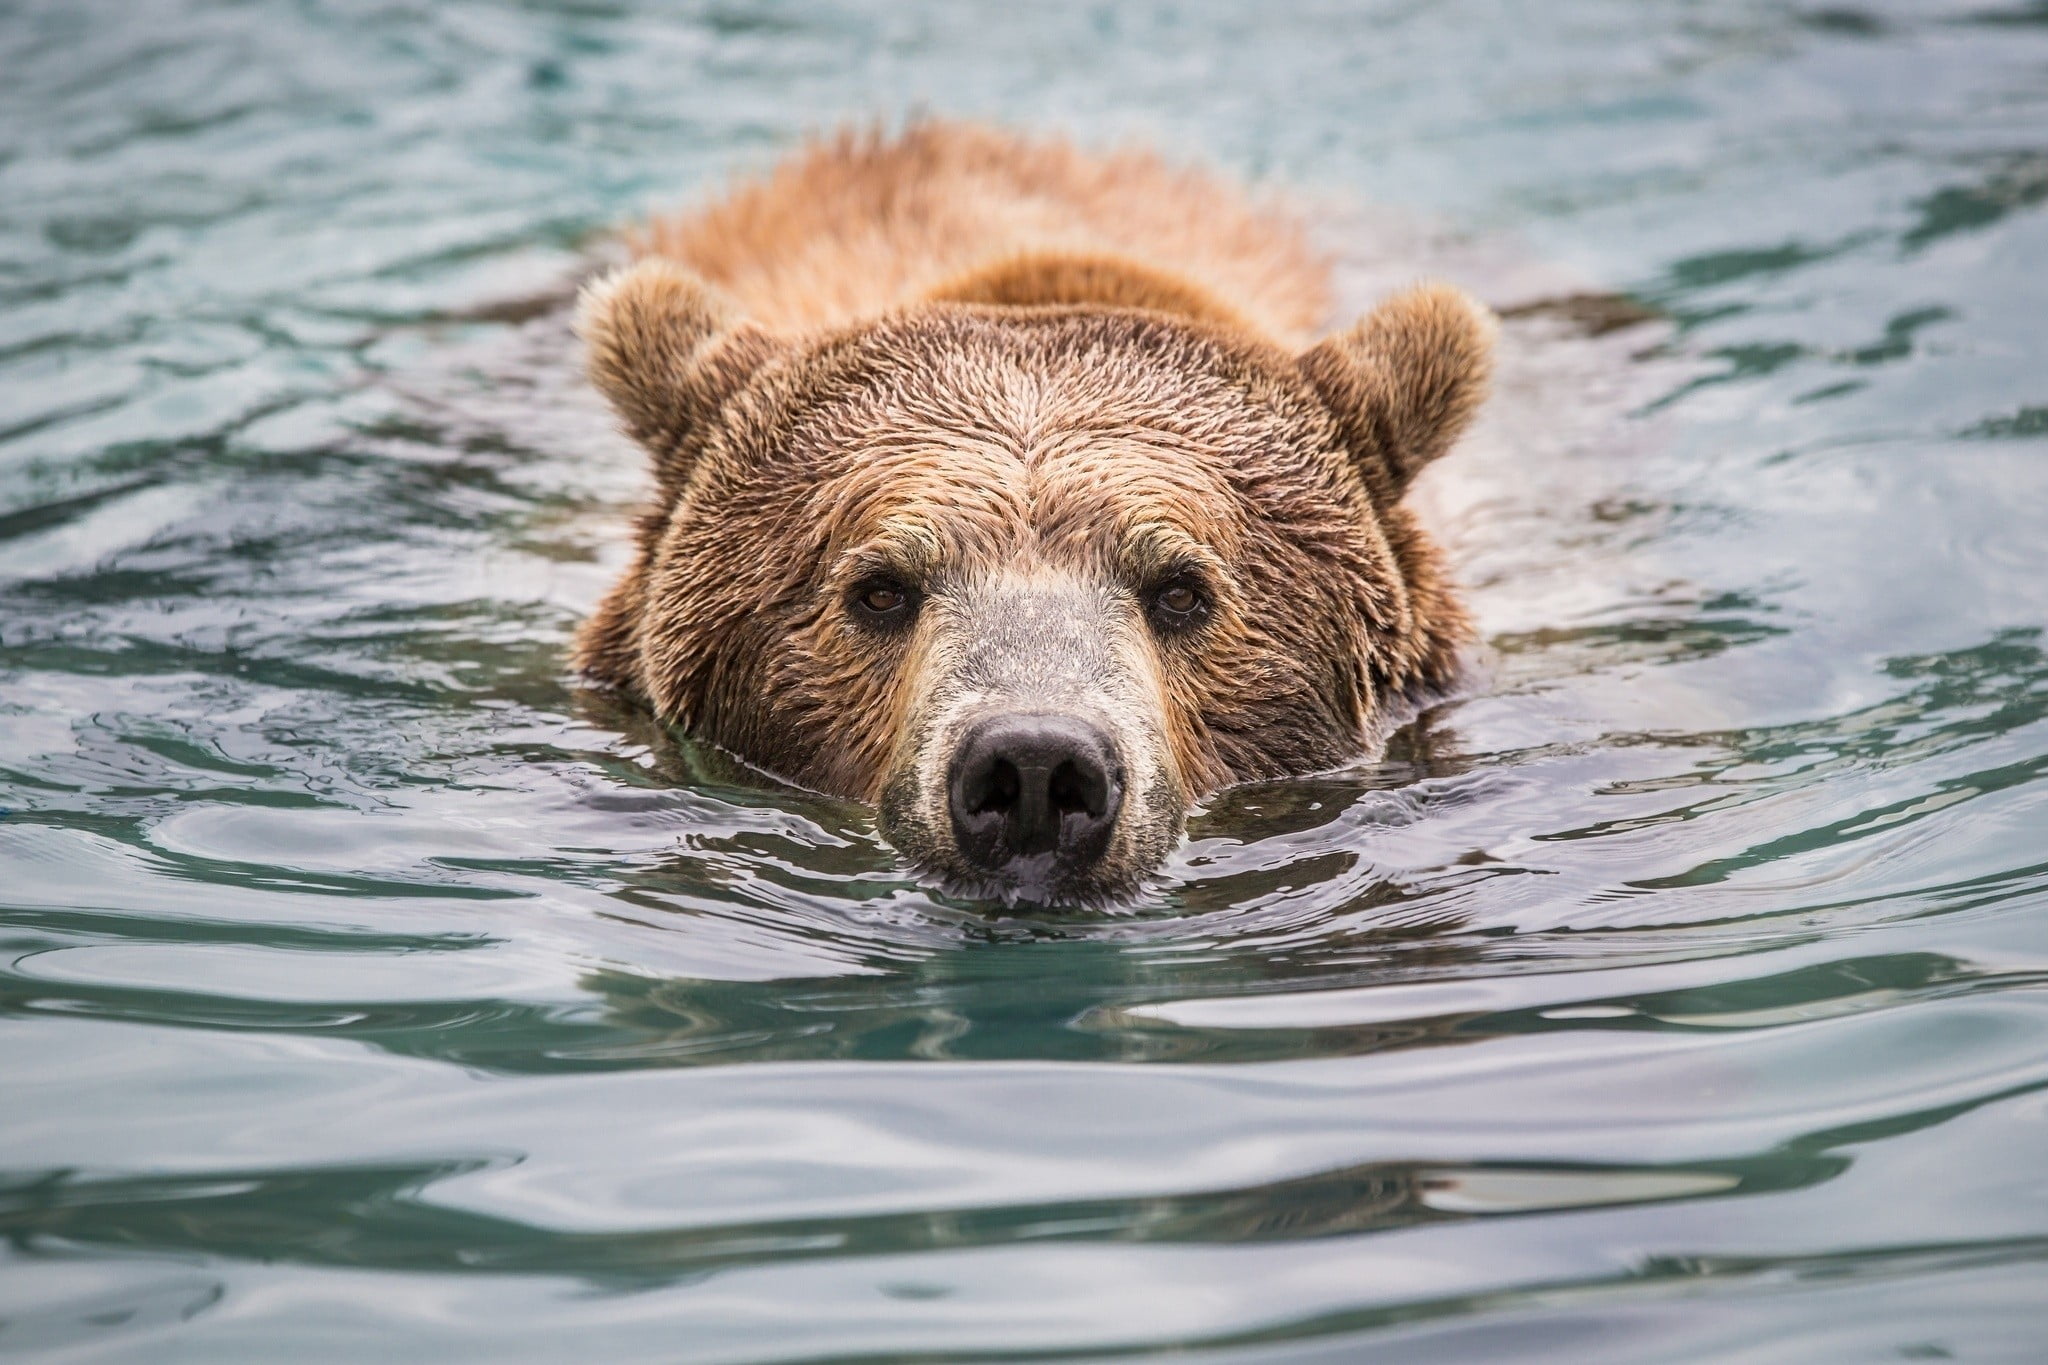 Grizzly Bears Can Swim